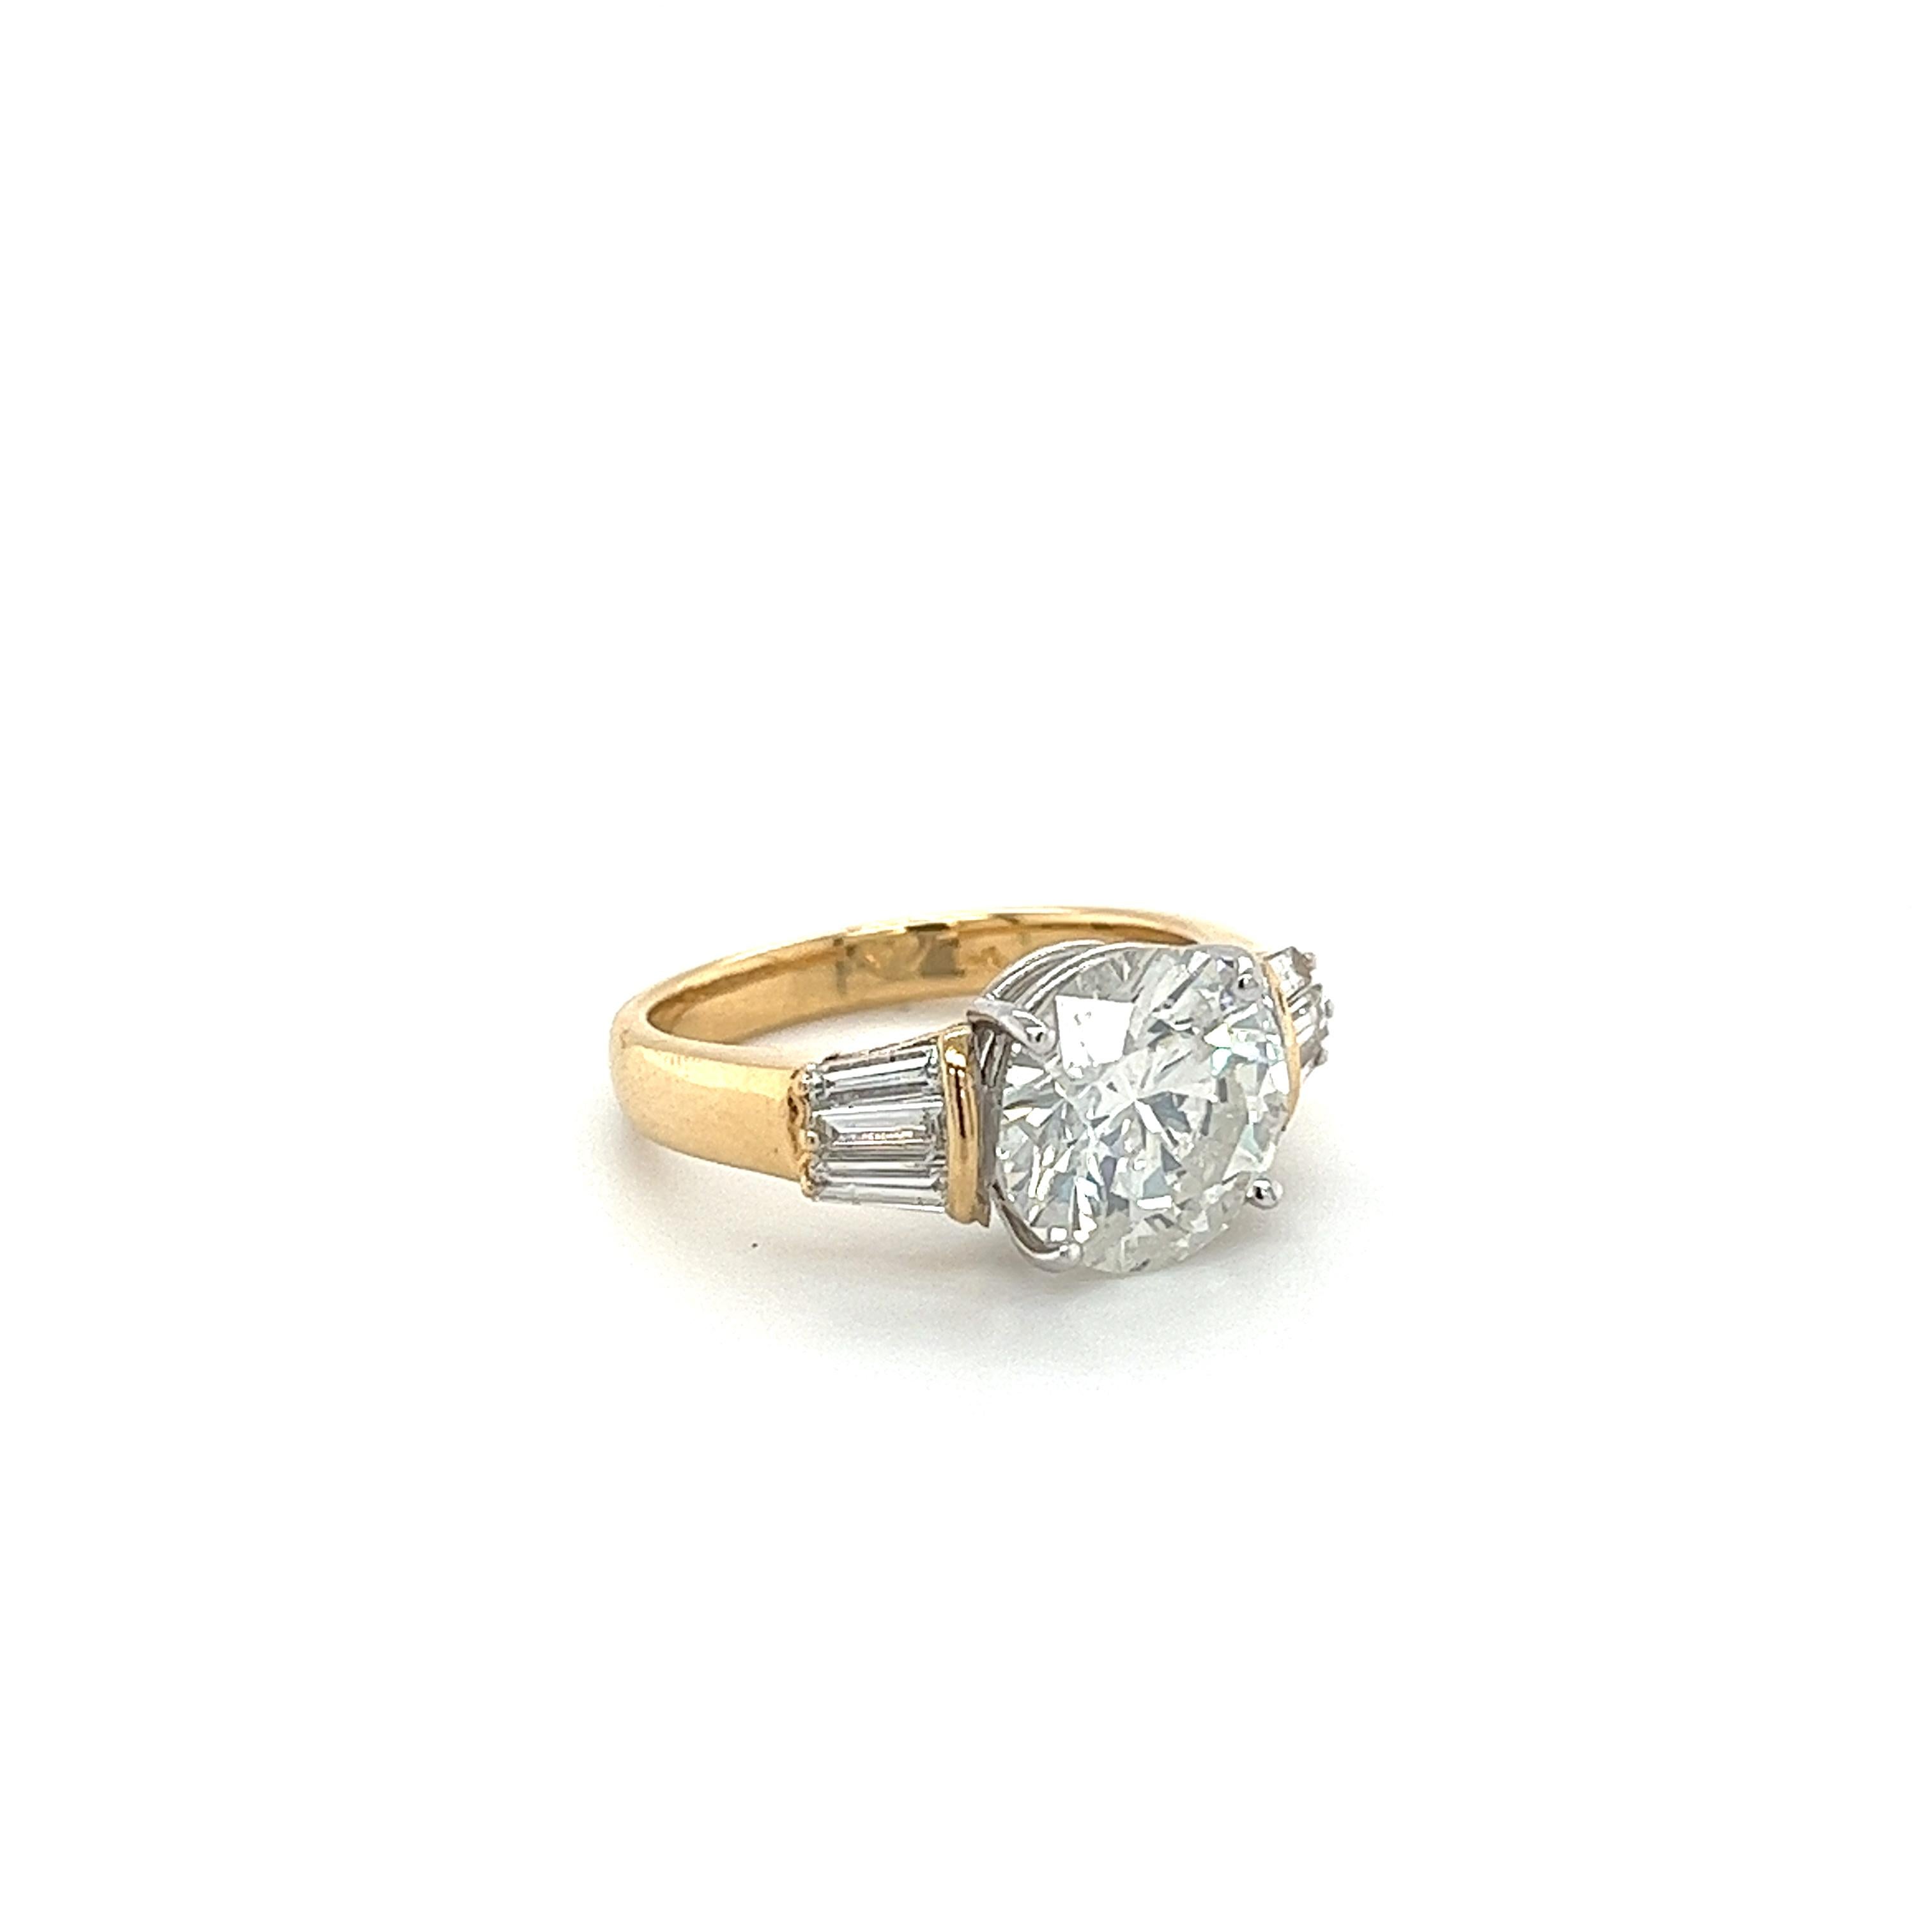 4.21 Carat Round Cut Diamond Engagement Ring With Baguettes in 2 Tone 18k Gold  For Sale 4